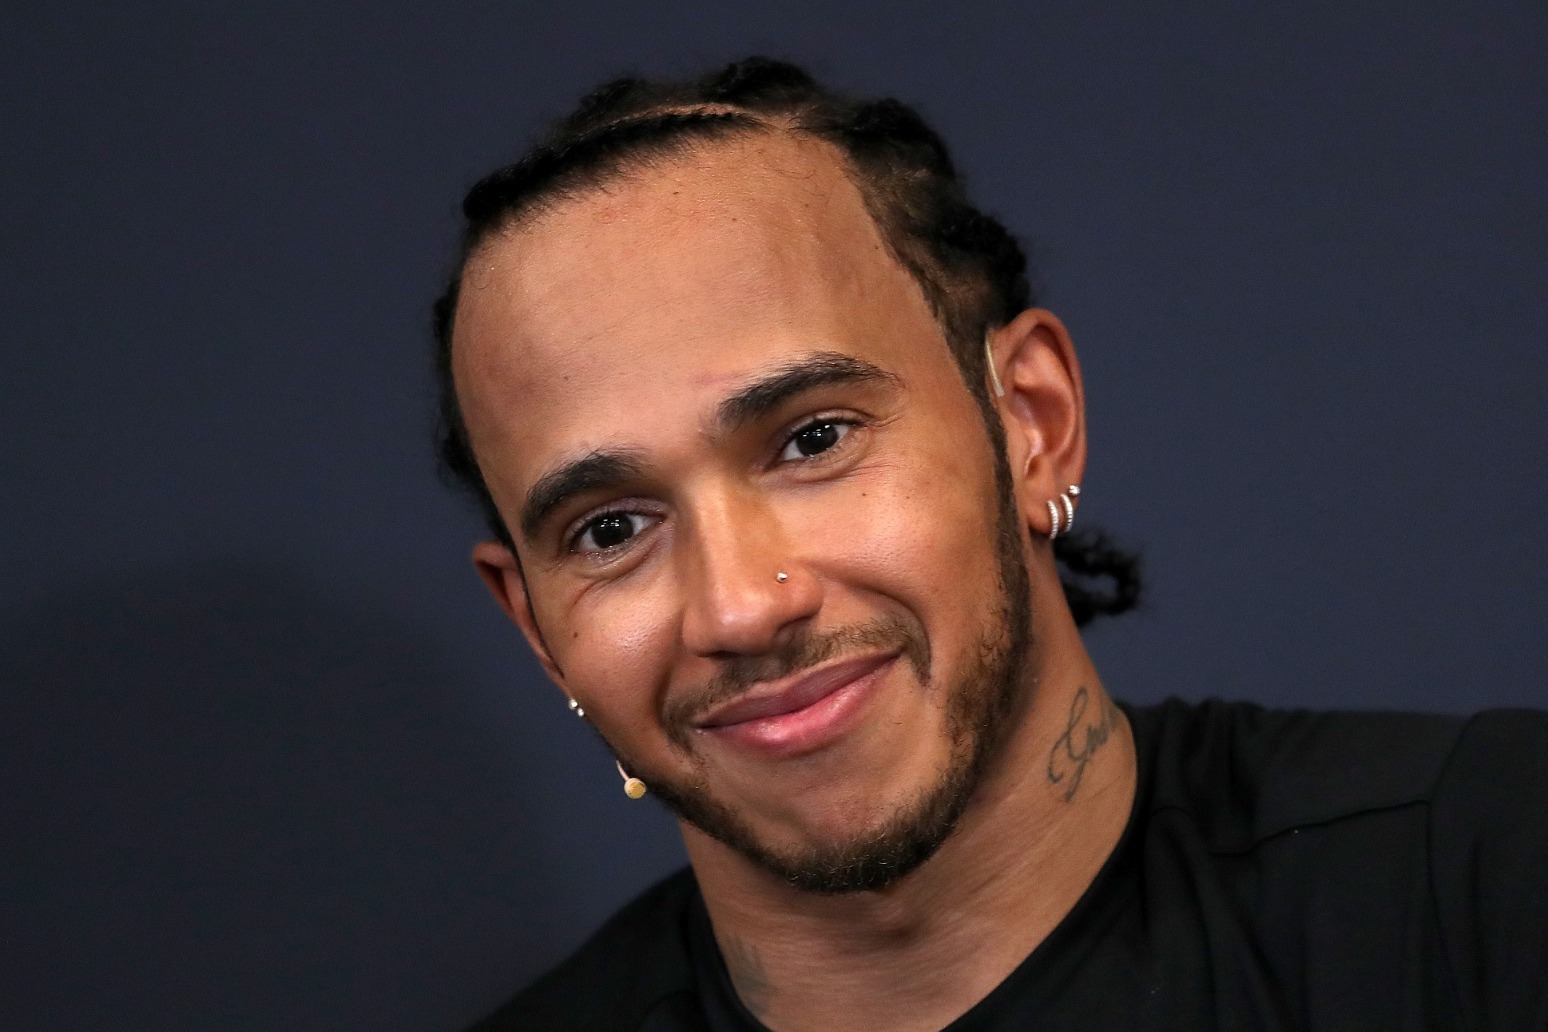 Lewis Hamilton urges more F1 stars to come forward and discuss topical issues 